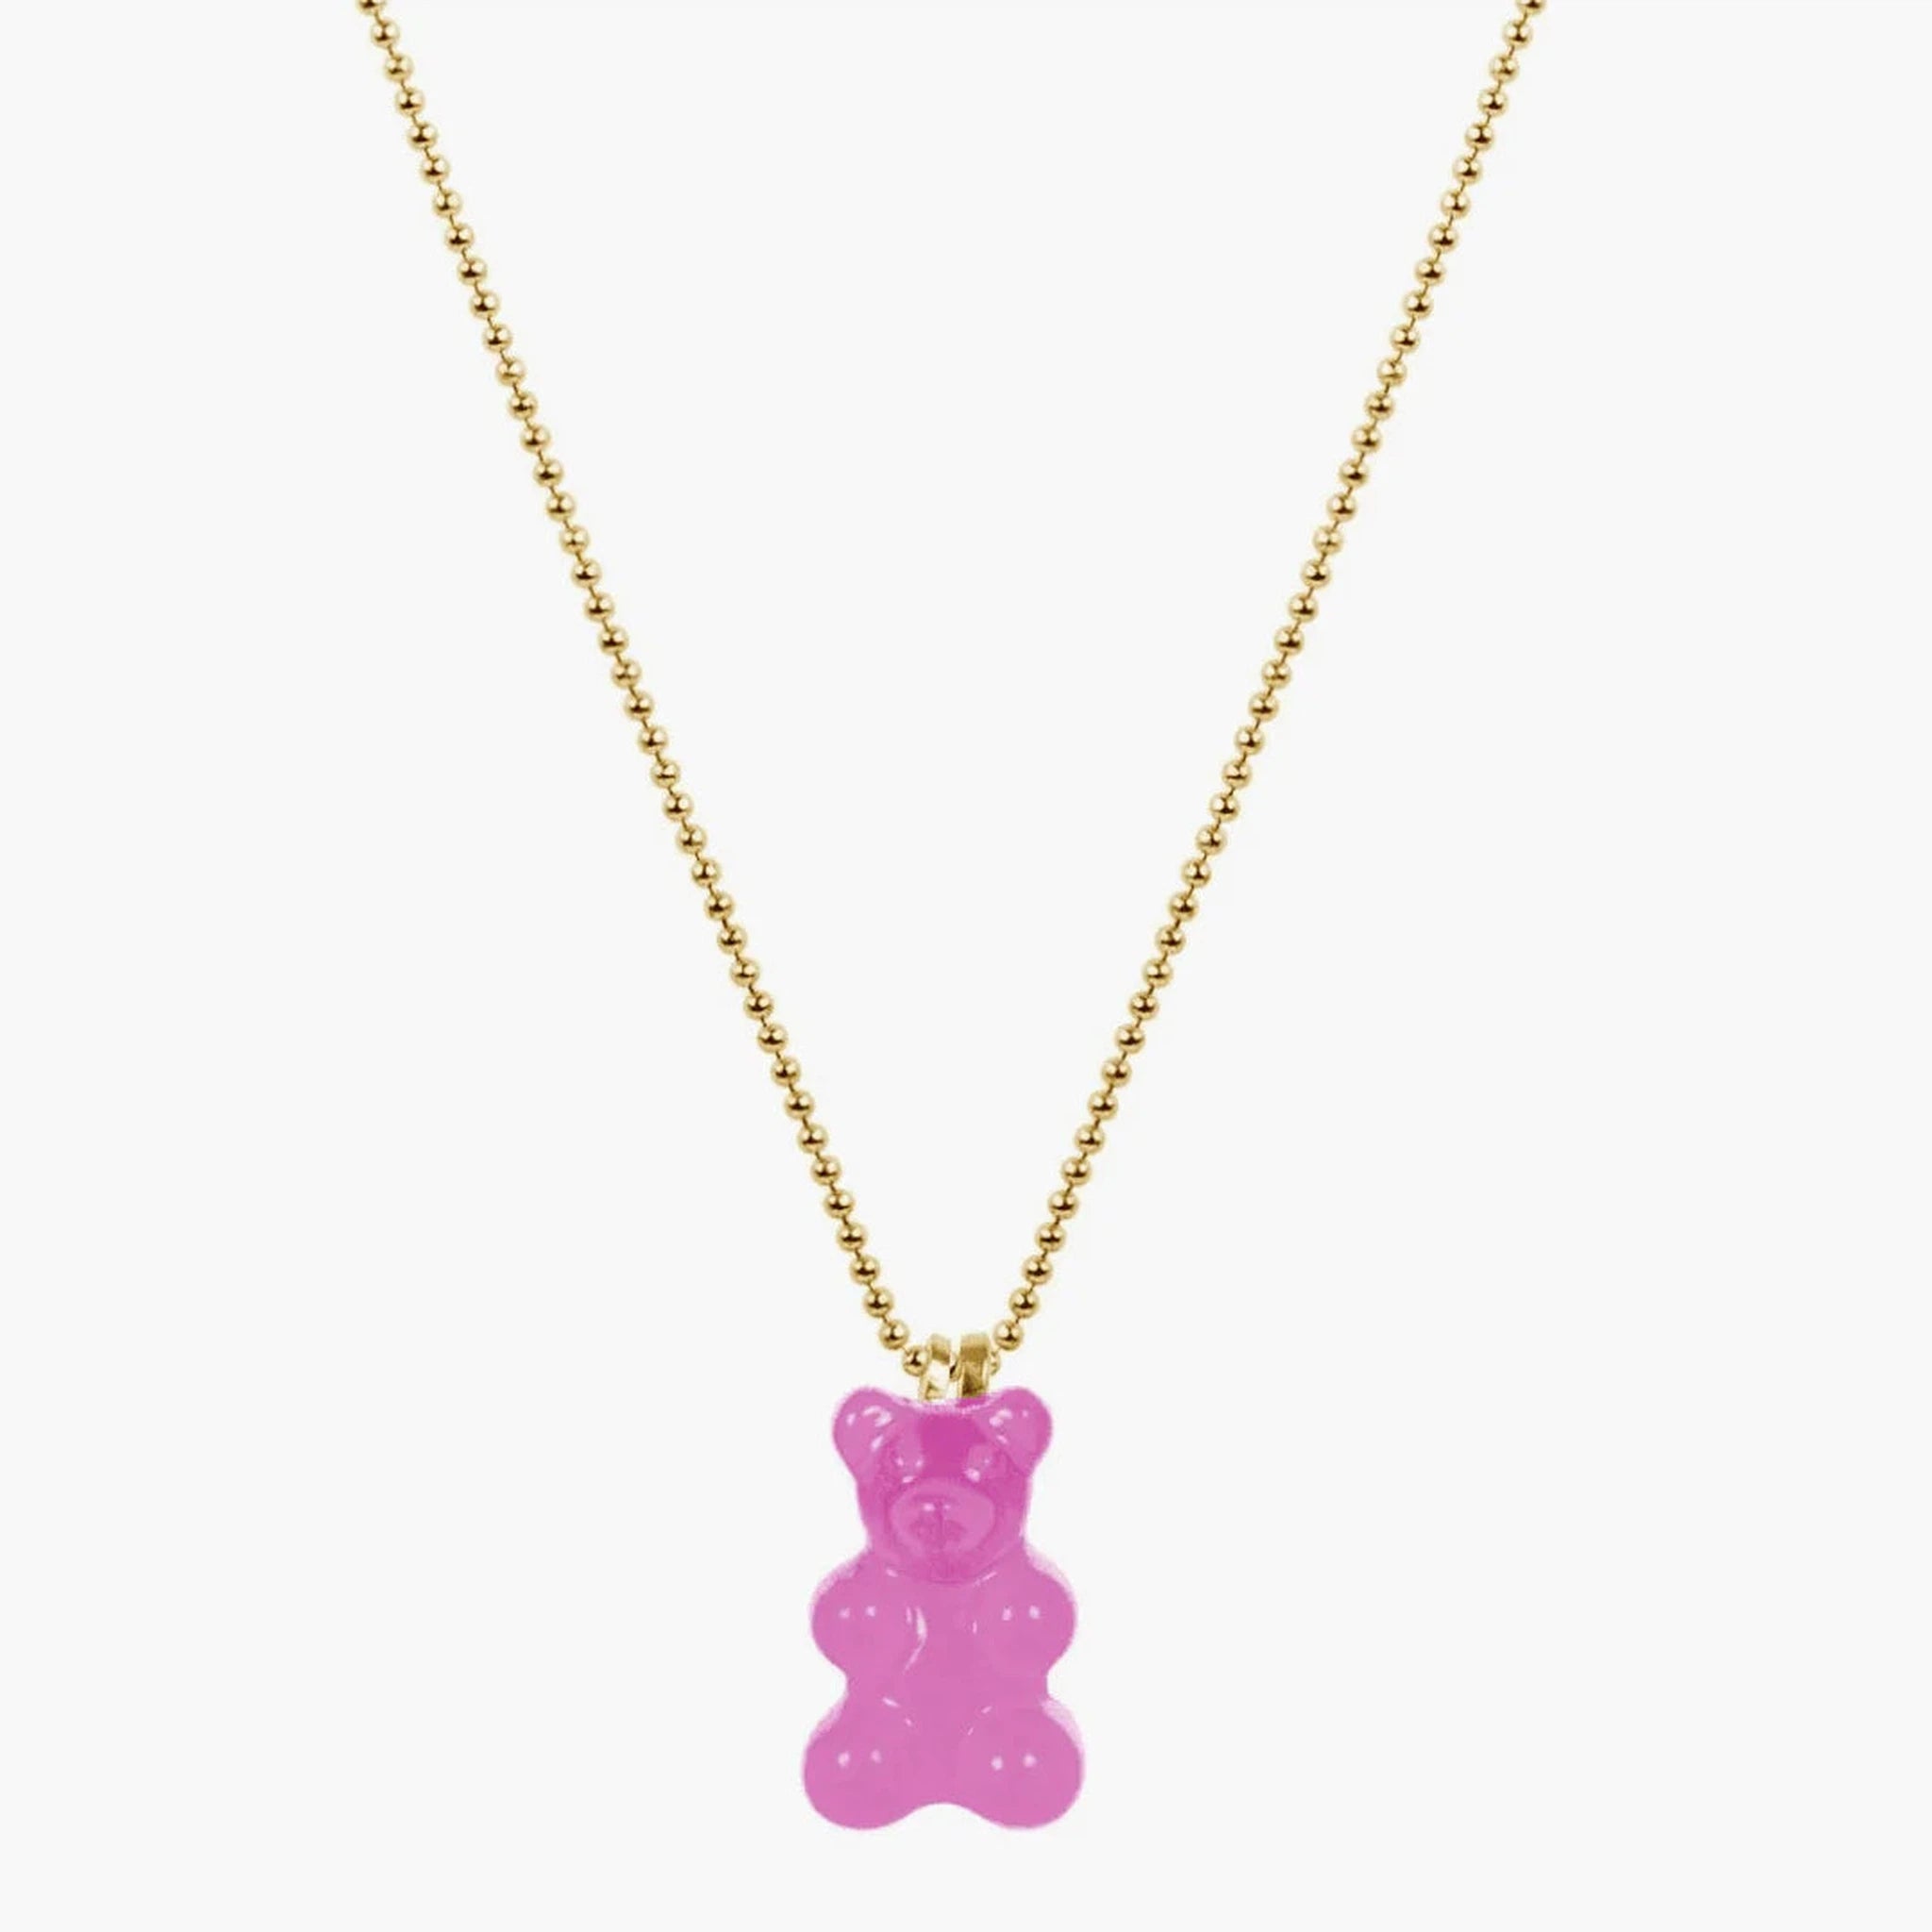 Gummy Bear Necklace in a Bottle - Several Colors